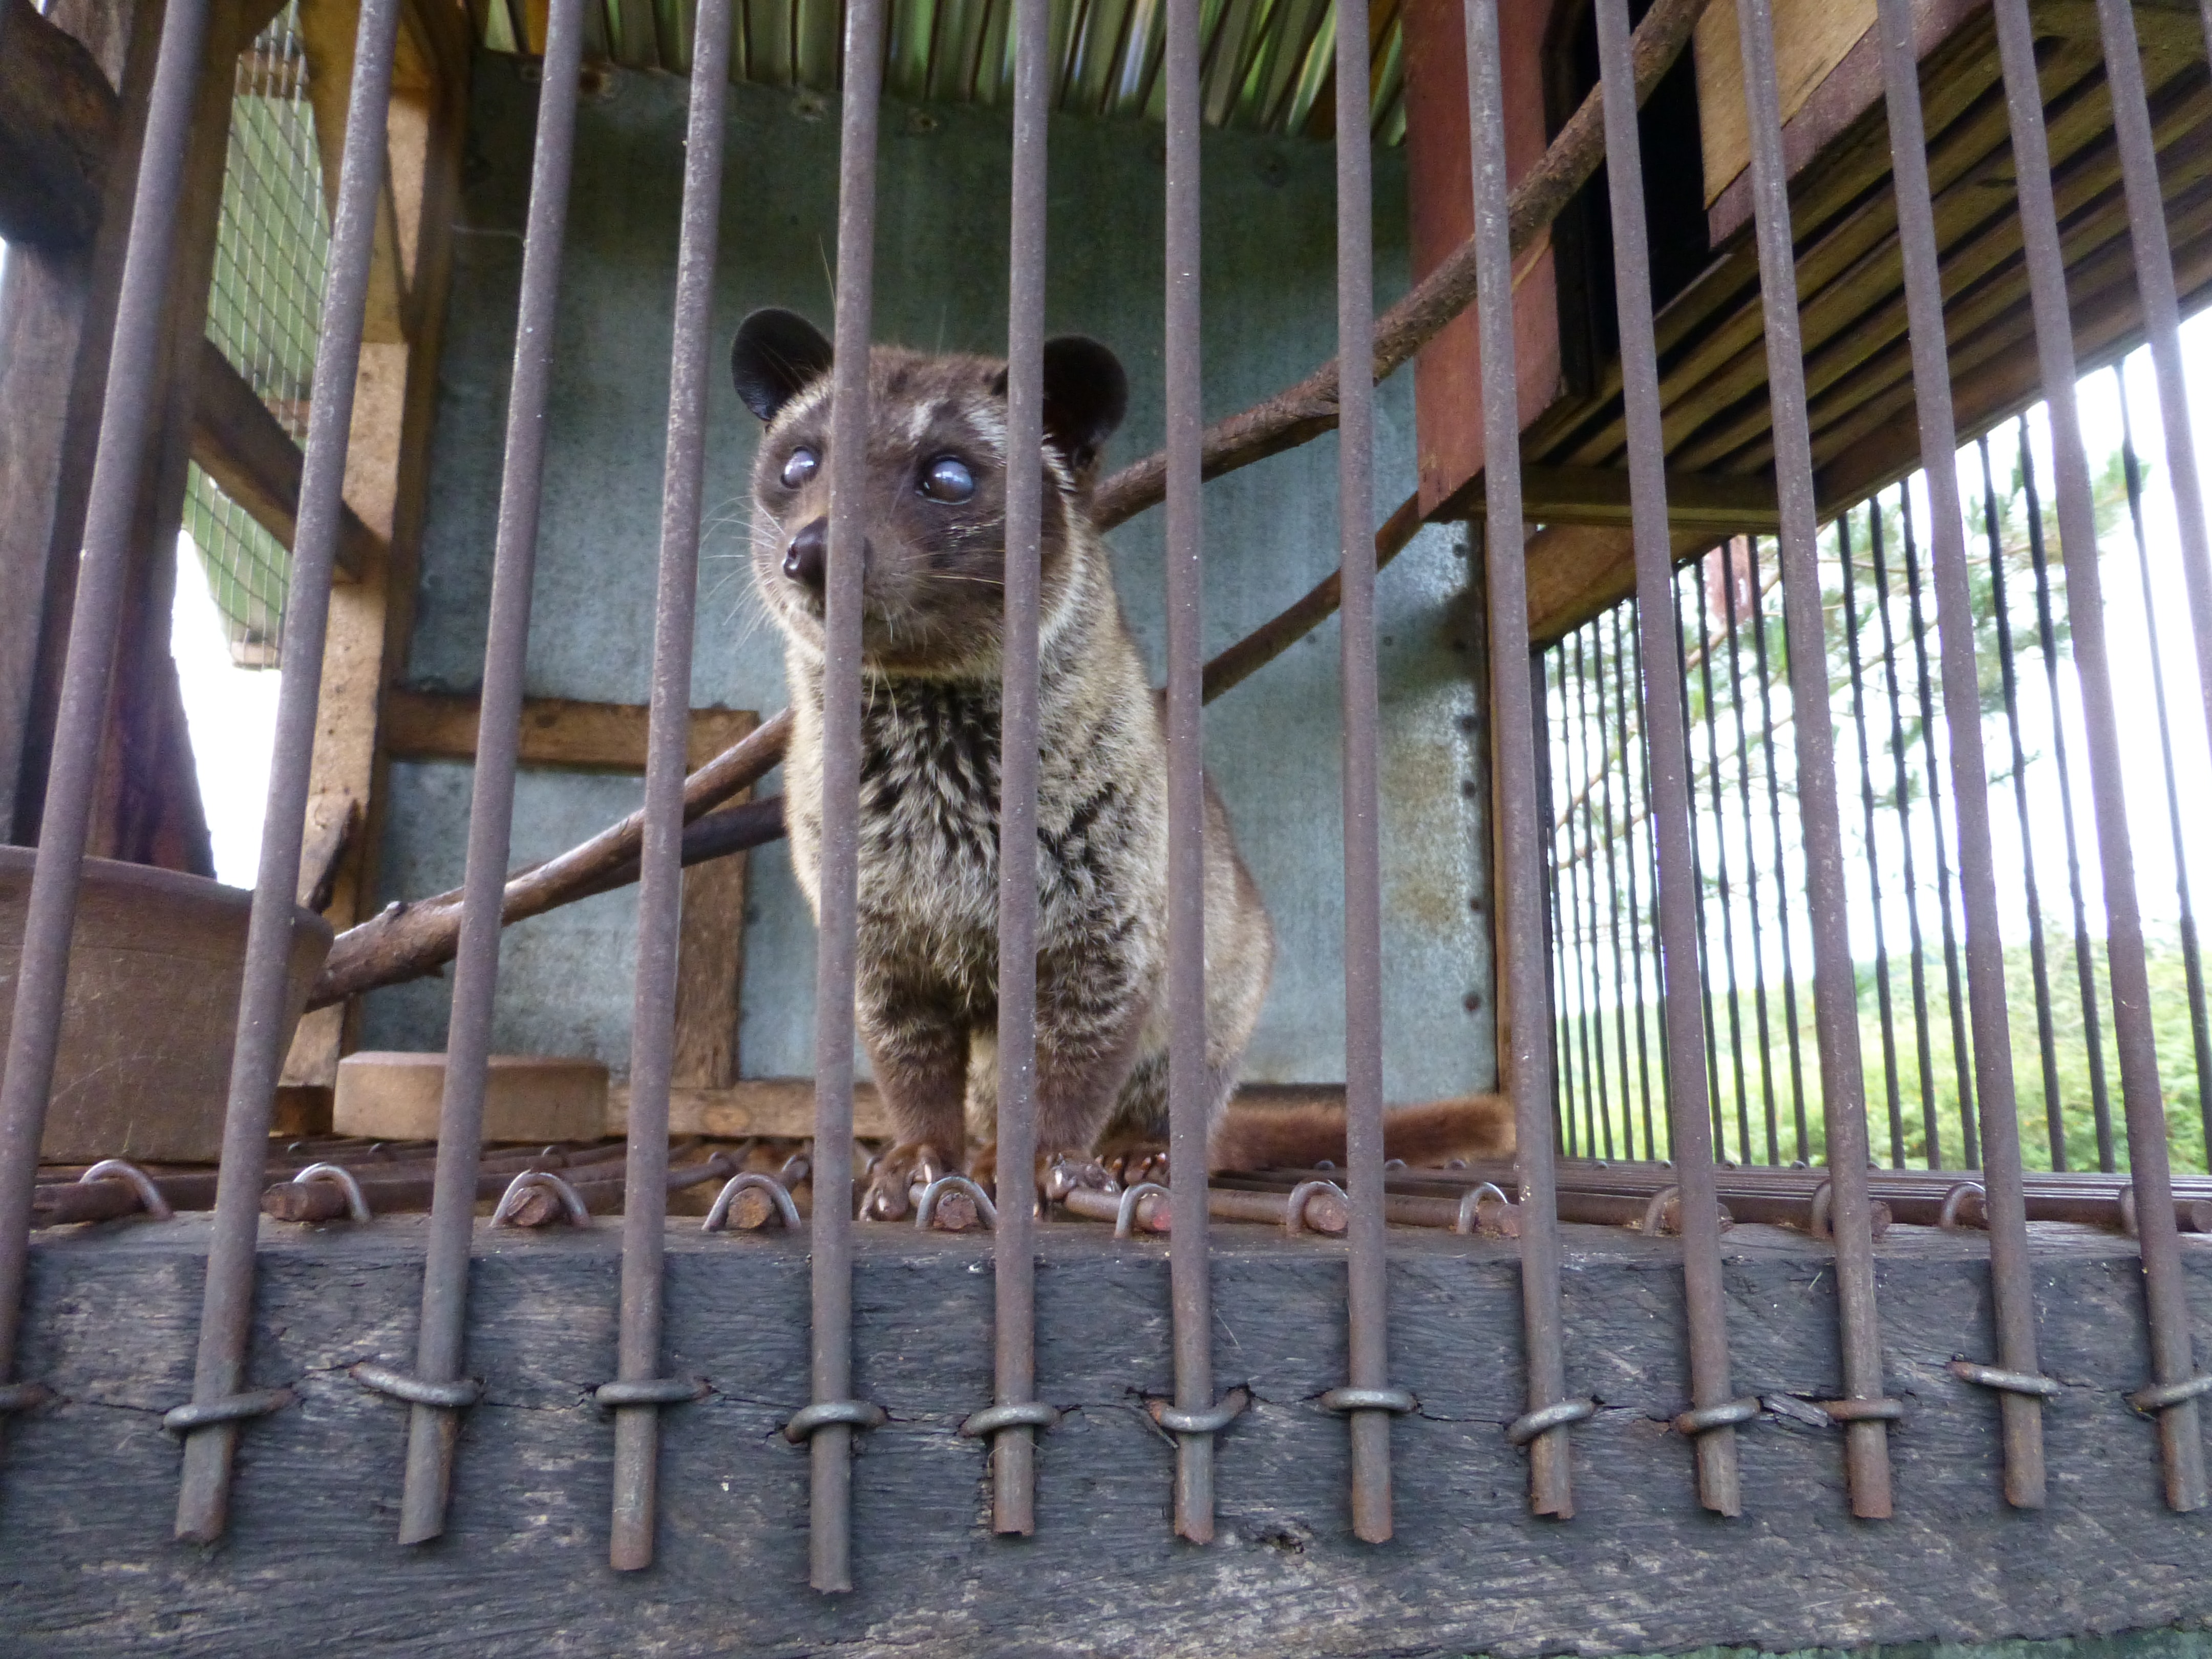 New Video: Civet Cats Are Still Exploited for ‘Poop Coffee’ in Bali